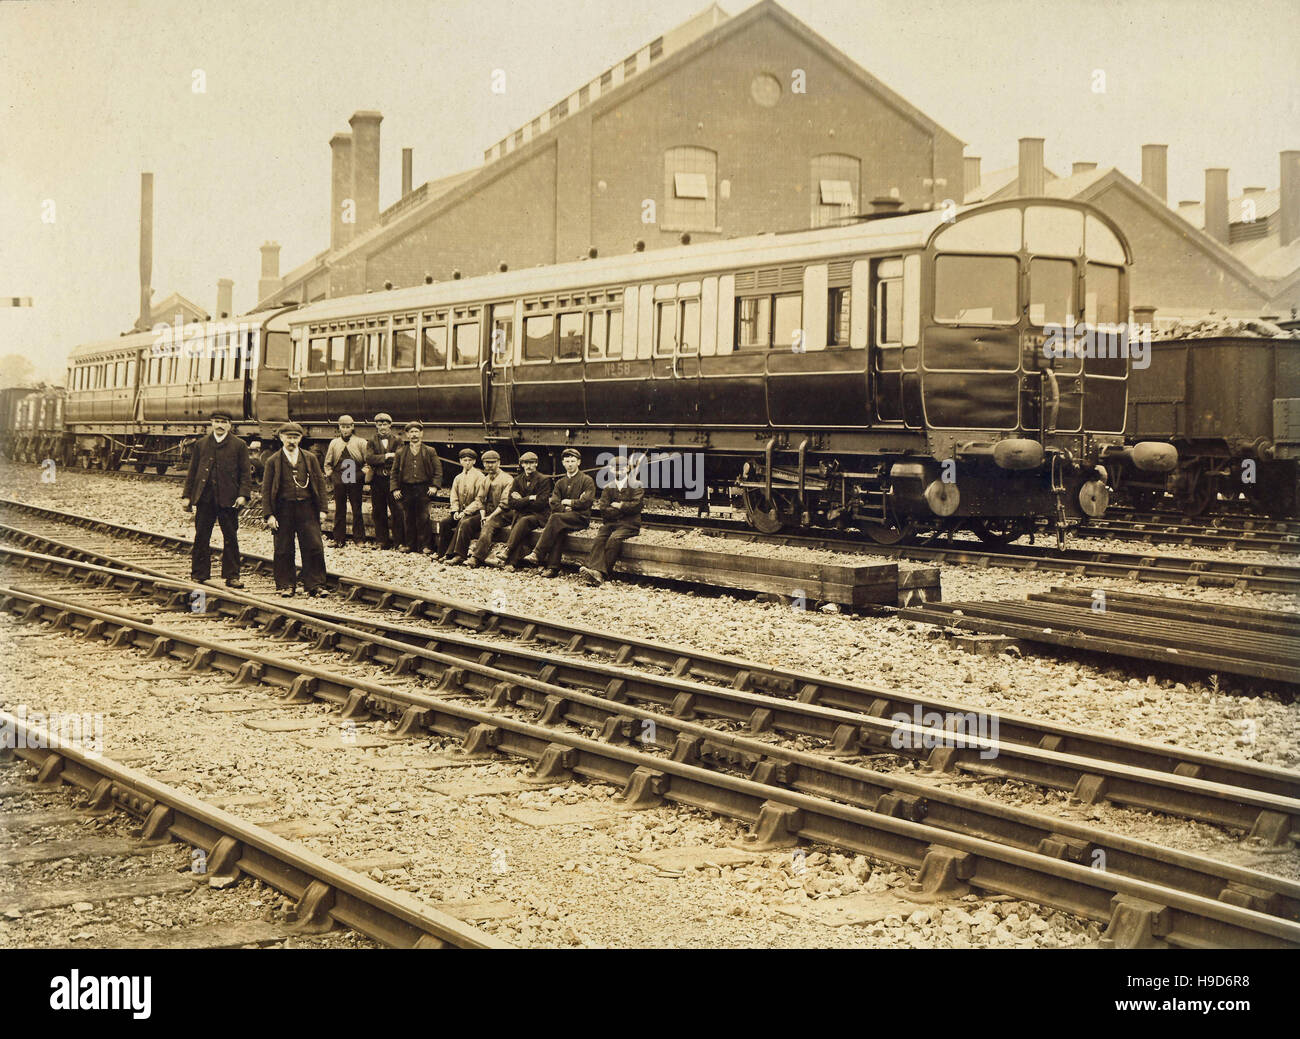 Historic archive image of railway workers pictured in front of railway carriages and sheds somewhere near Carmarthen, Wales. Late 19th or early 20th century. Stock Photo